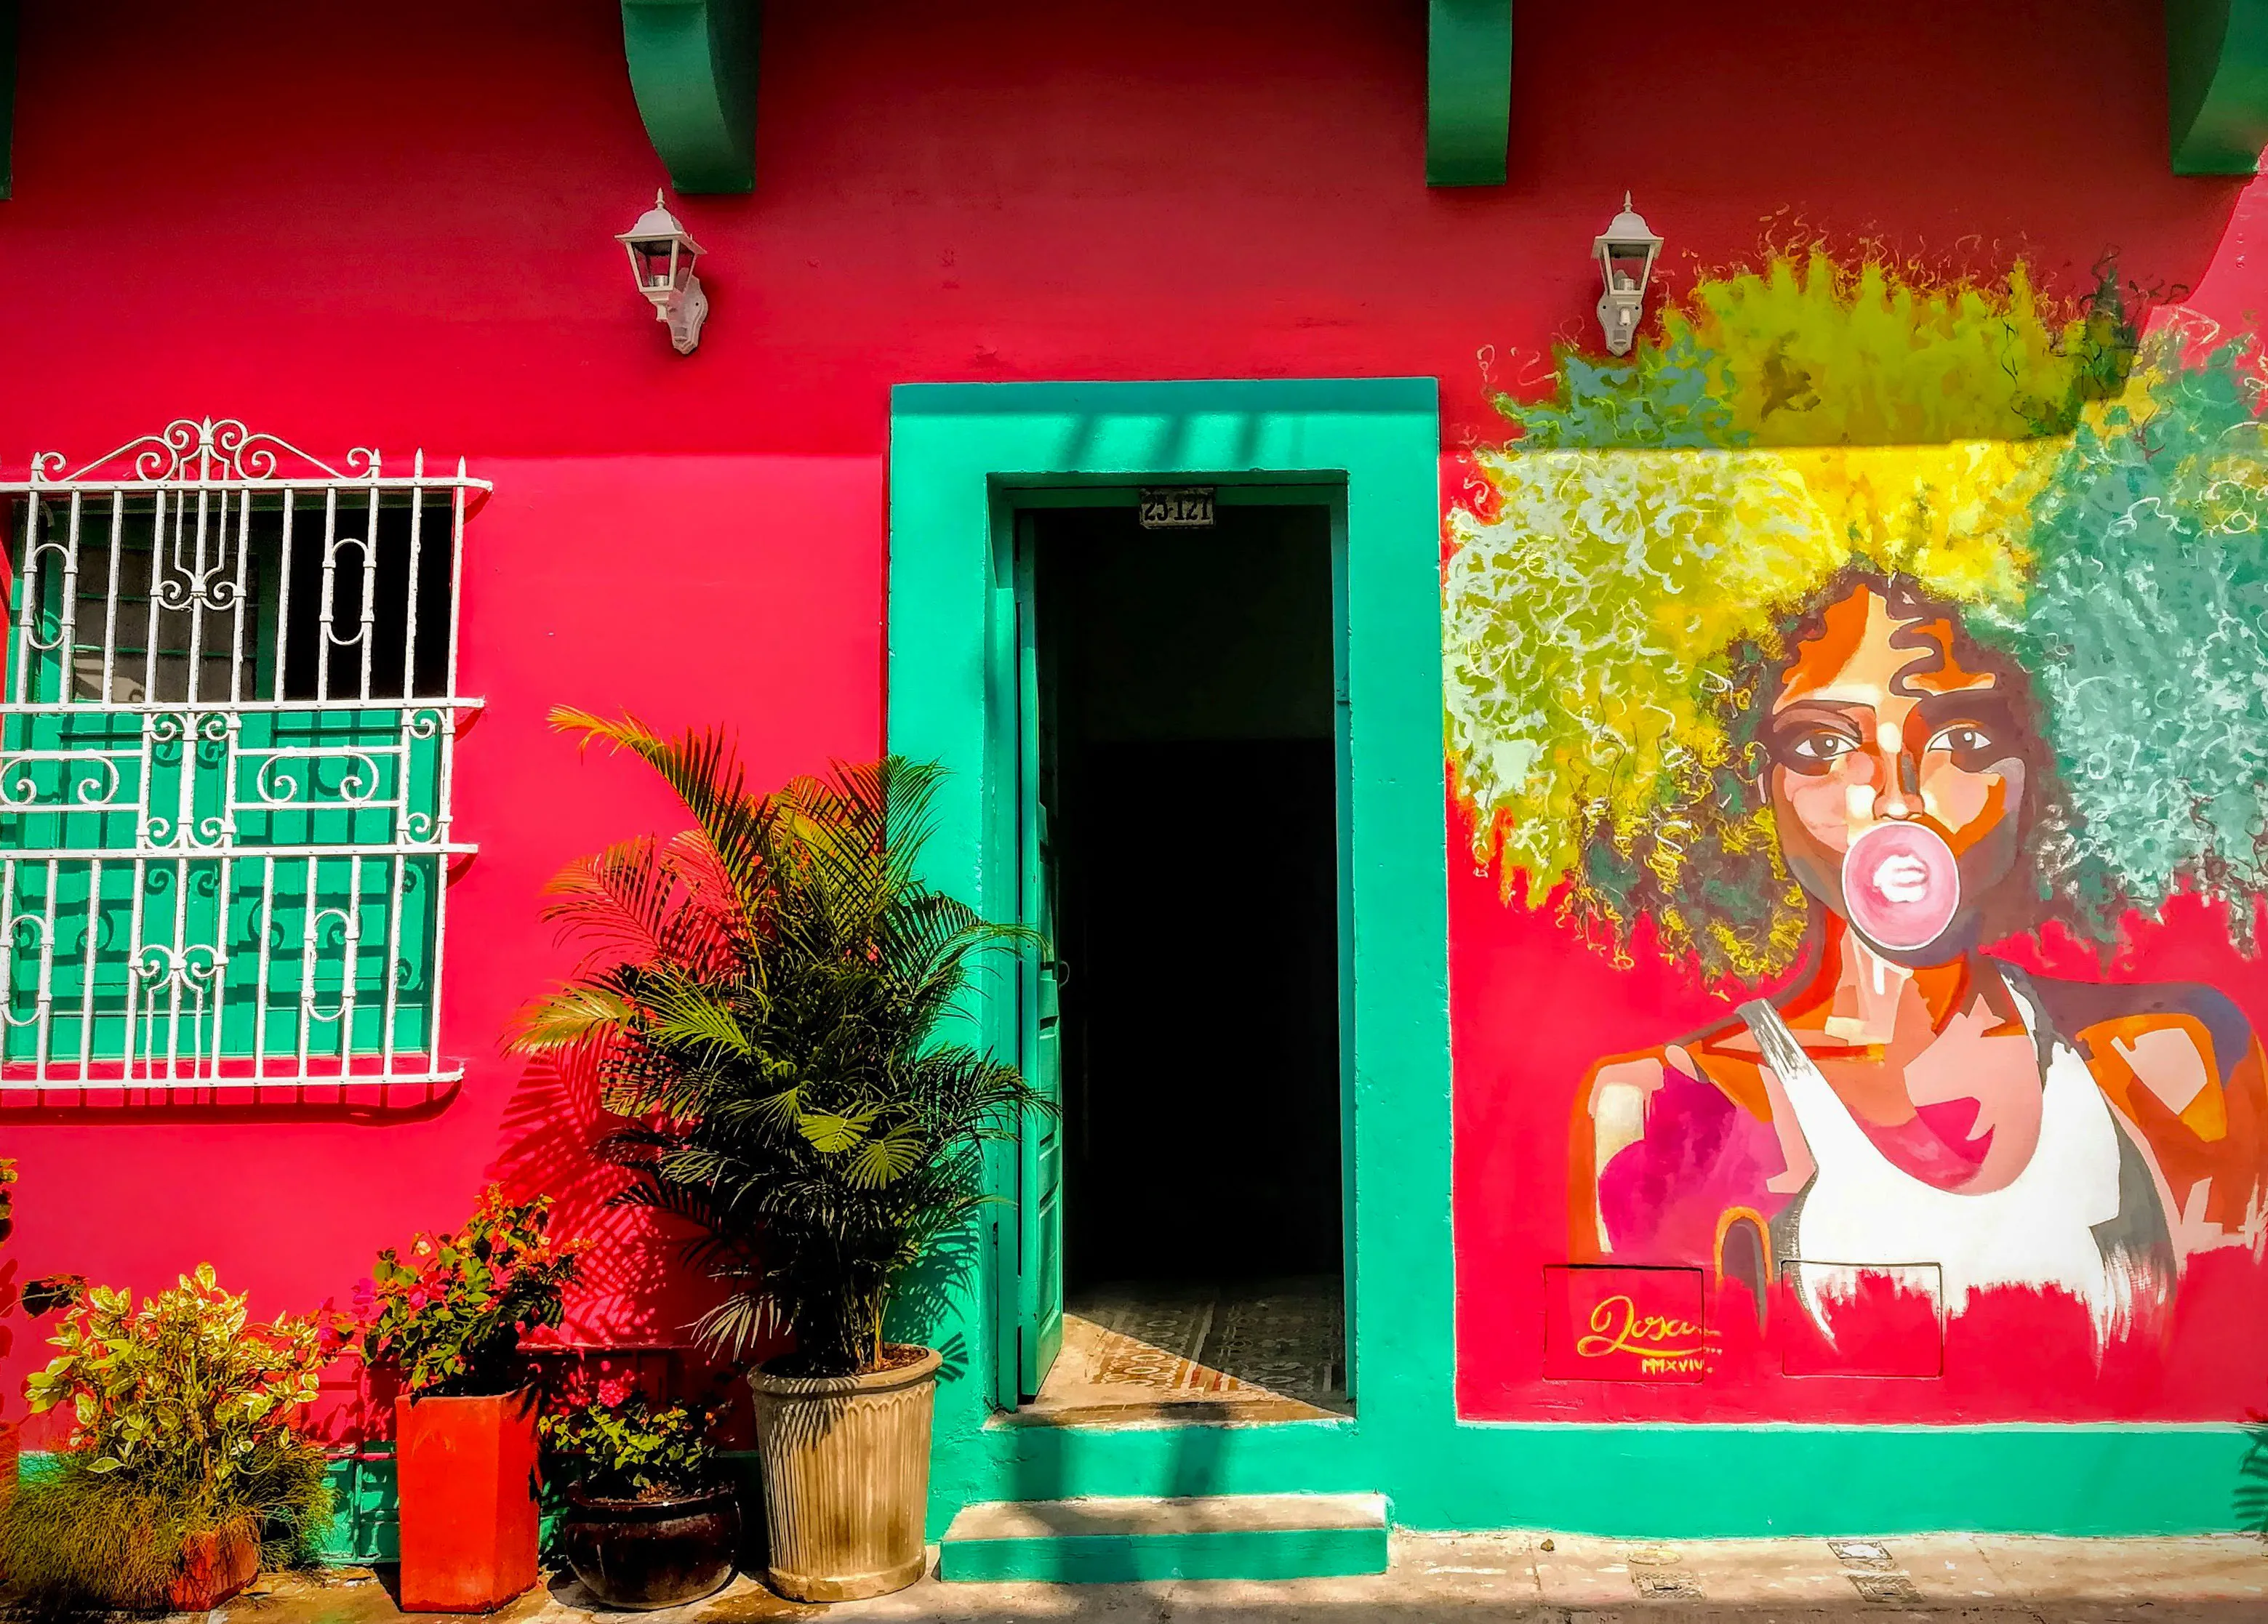 Popular graffiti tours of Colombia